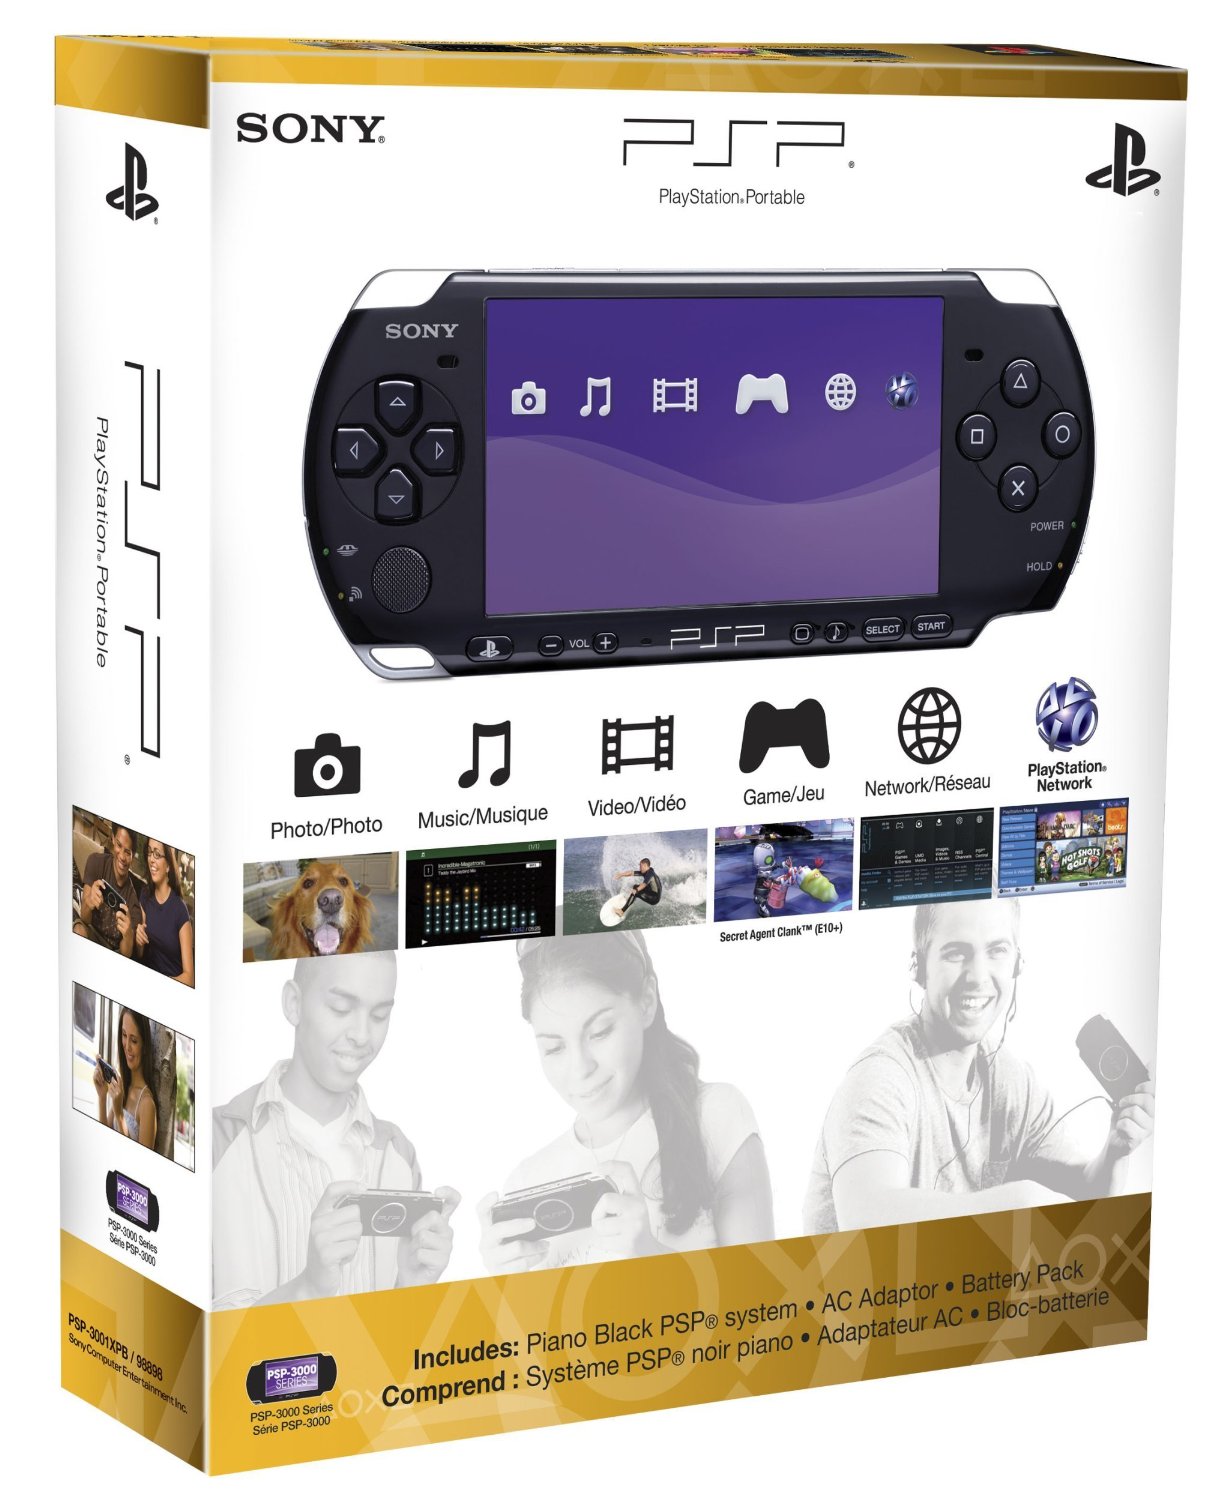 Sony psp software download